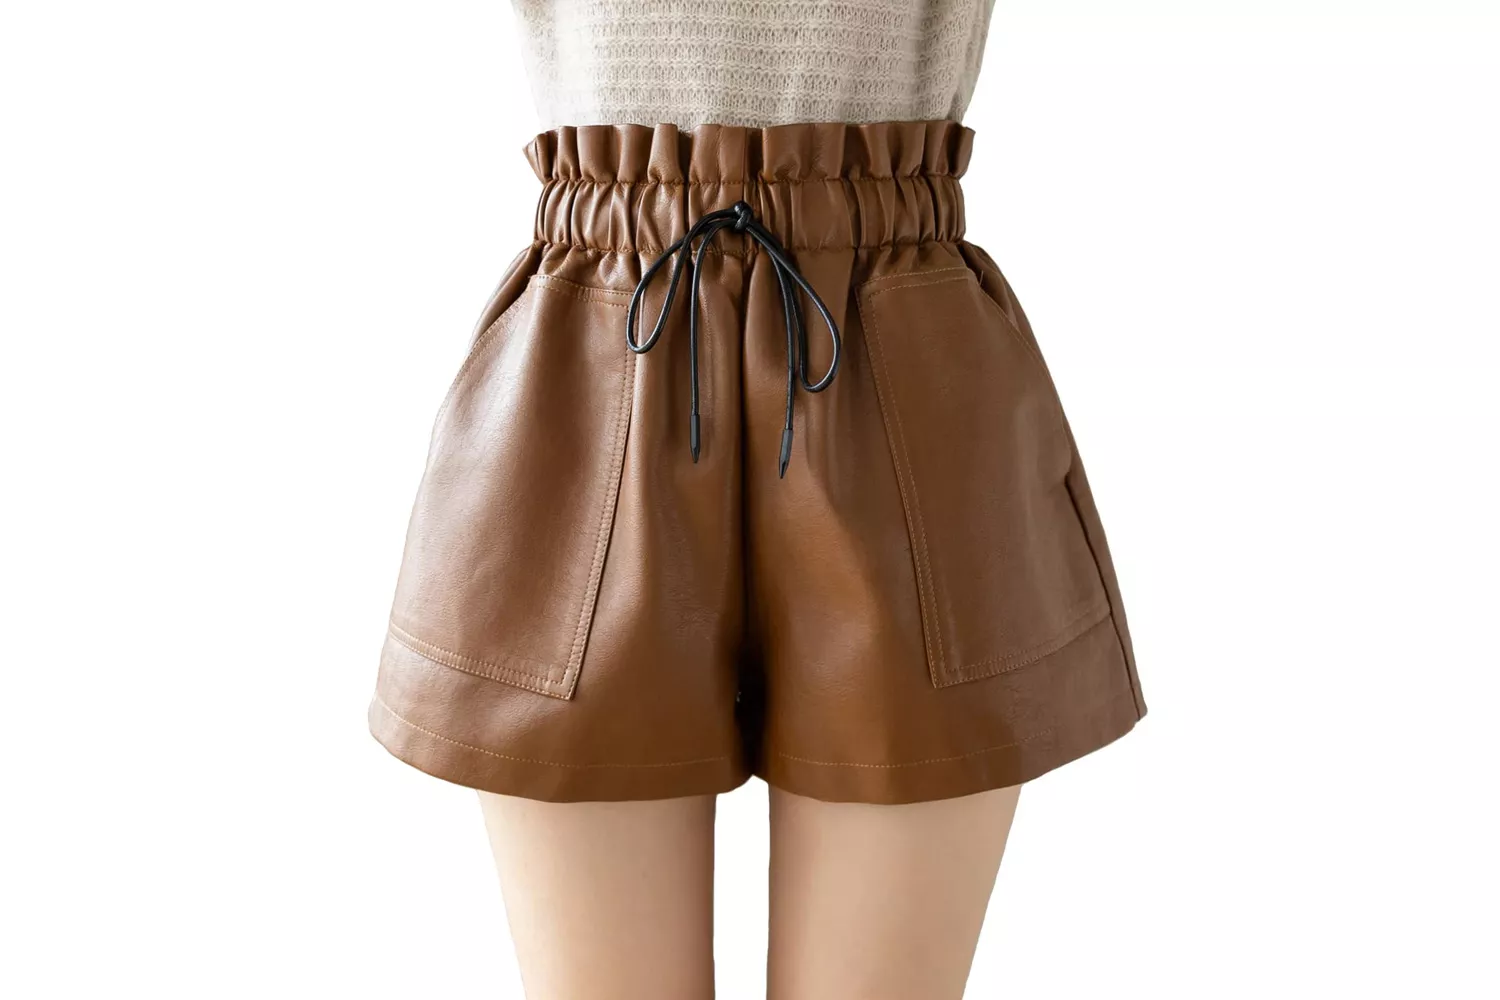 SCHHJZPJ High Waisted Wide Leg Faux Leather Shorts for Women